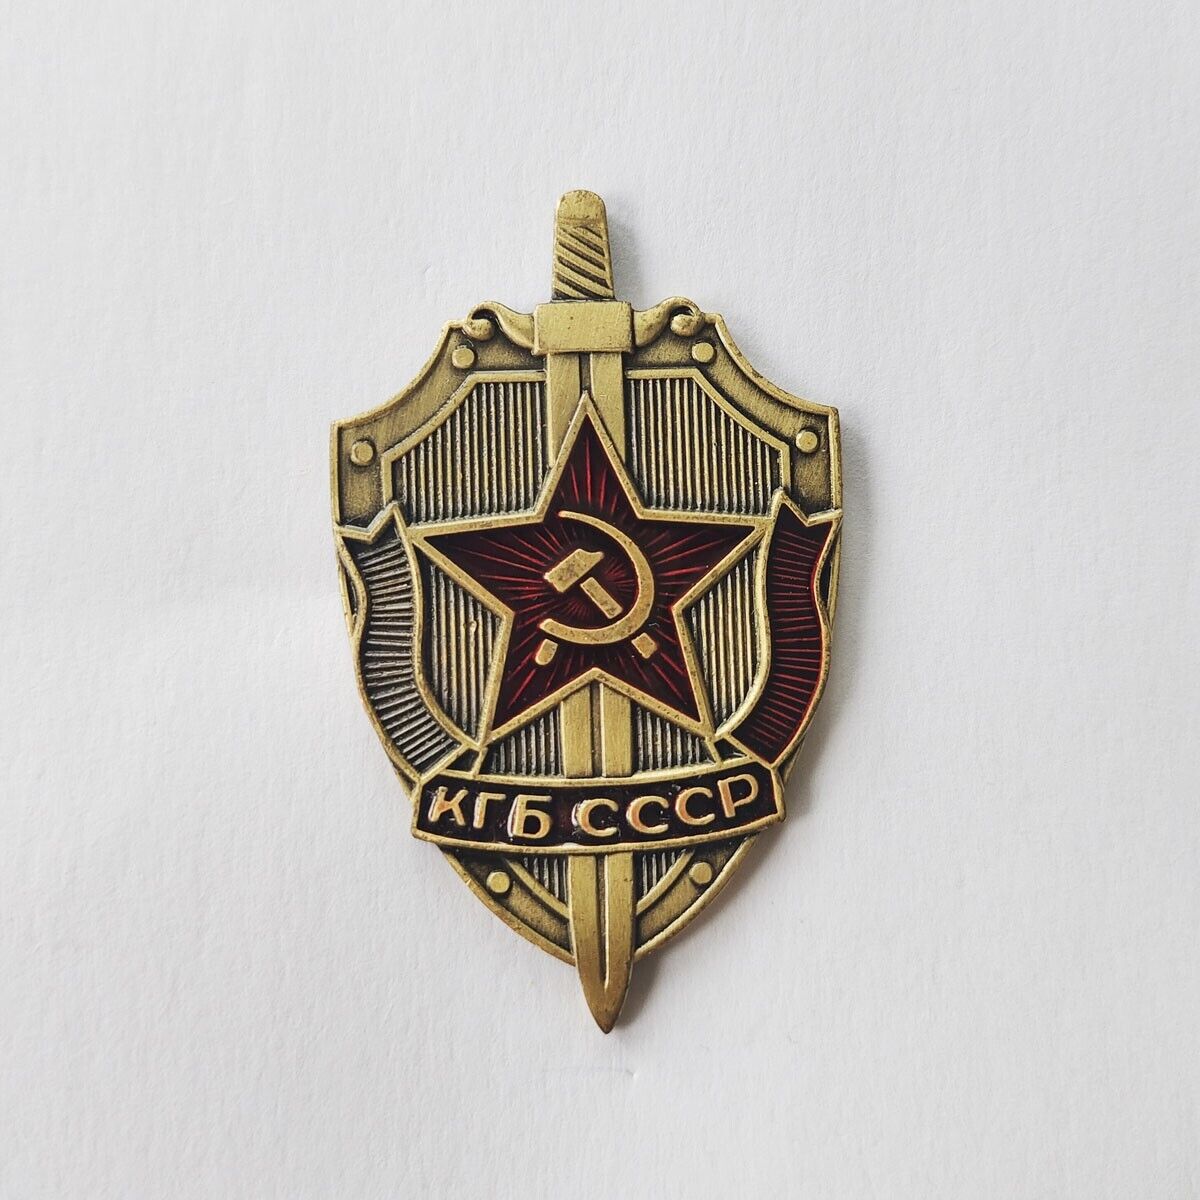 WW2 USSR Soviet Union KGB SHIELD Committee of State Security Badge insignia